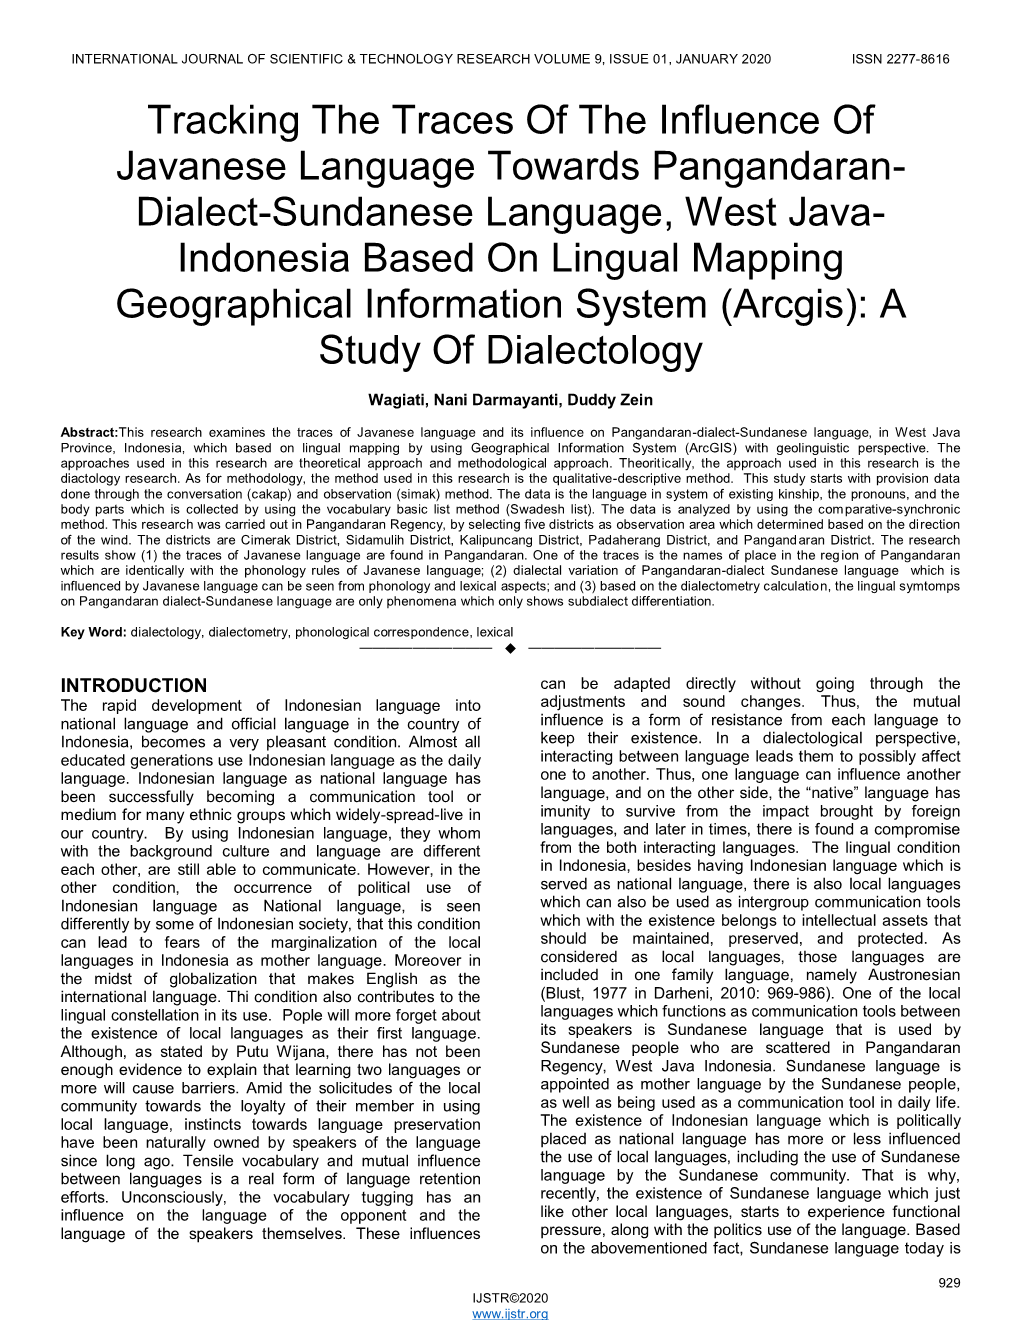 Dialect-Sundanese Language, West Java- Indonesia Based on Lingual Mapping Geographical Information System (Arcgis): a Study of Dialectology